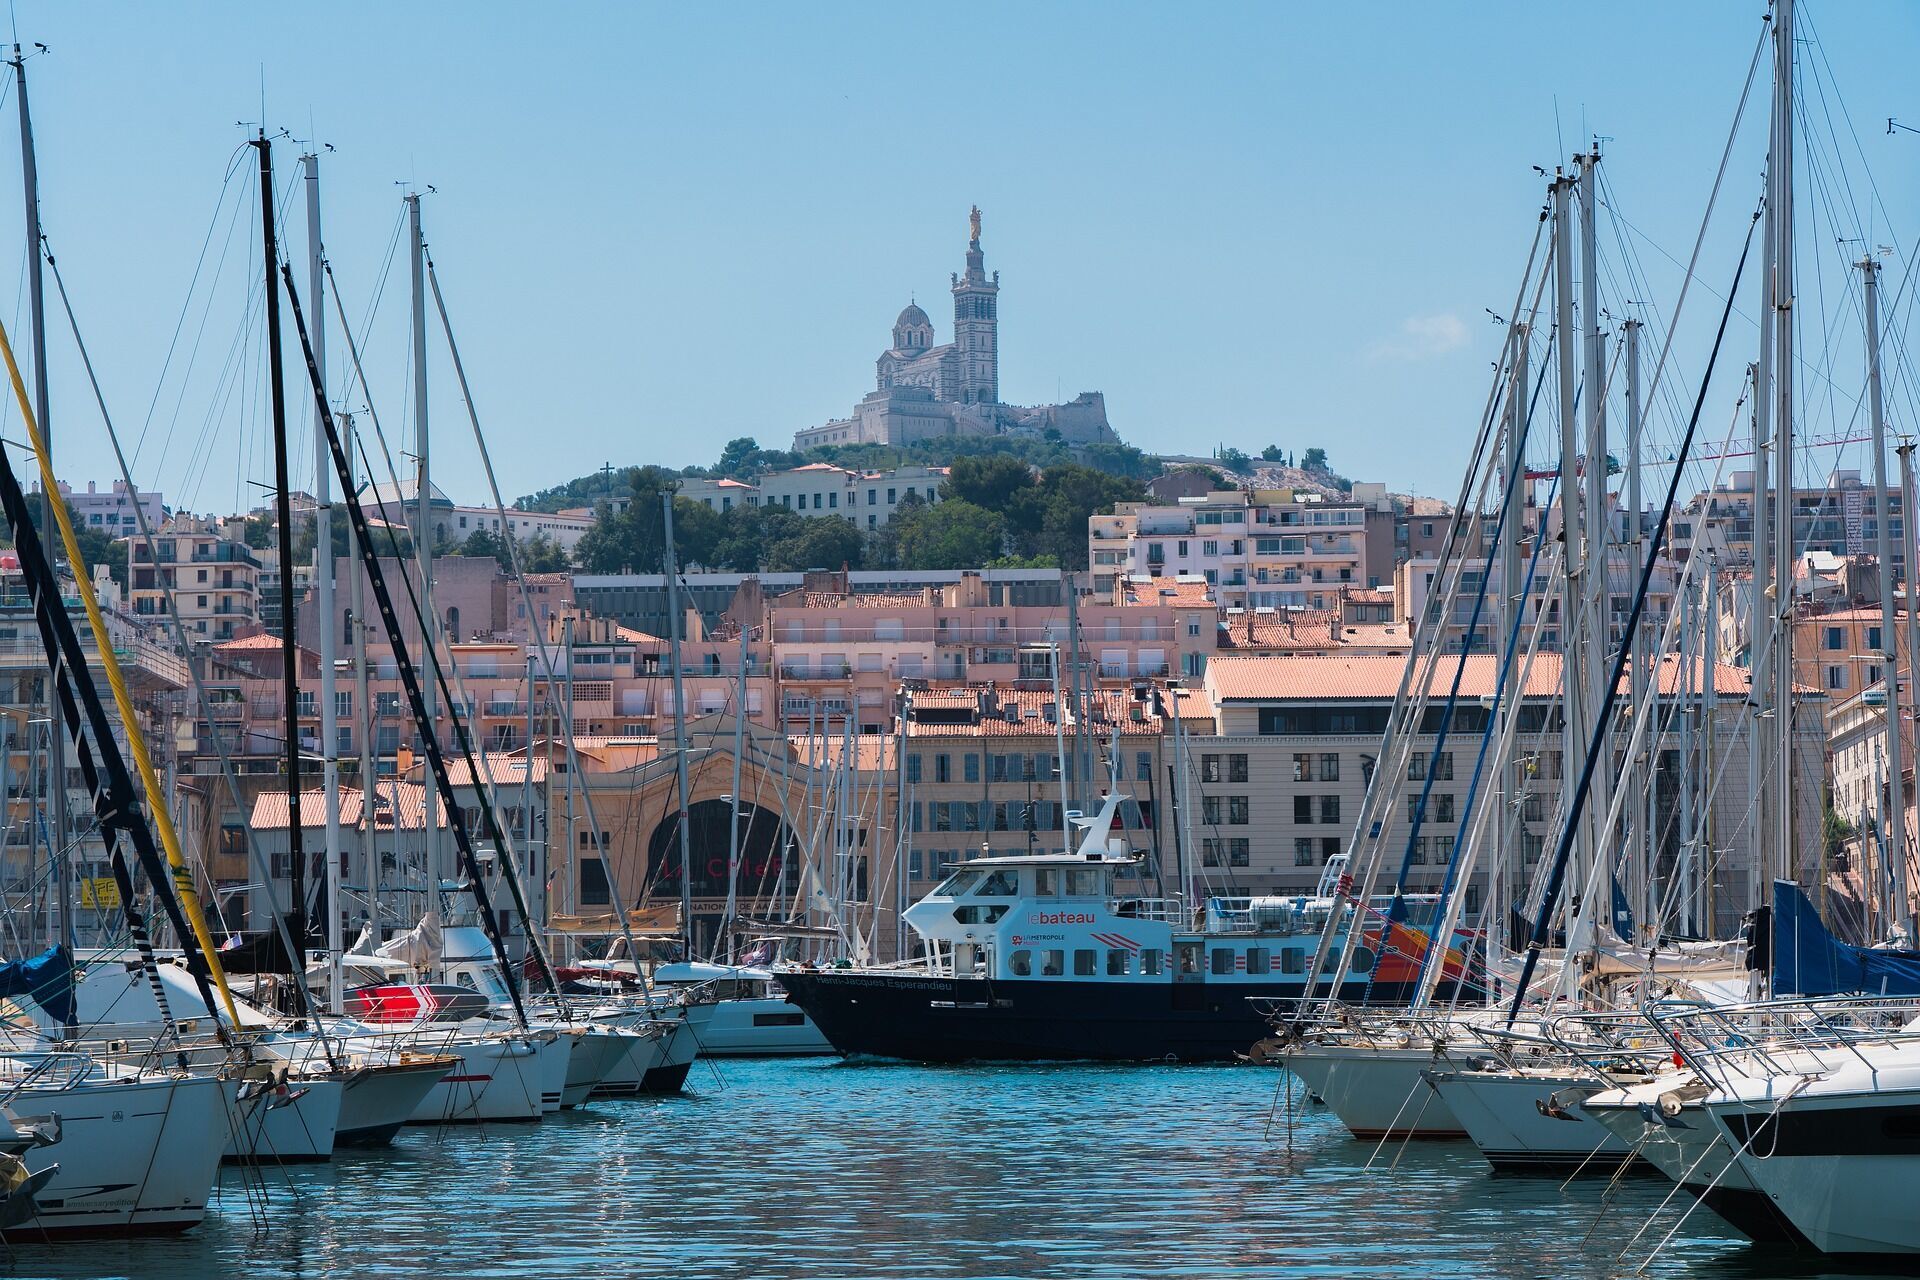 10 entertainment options in Marseille: How to spend great time on the Mediterranean coast of France